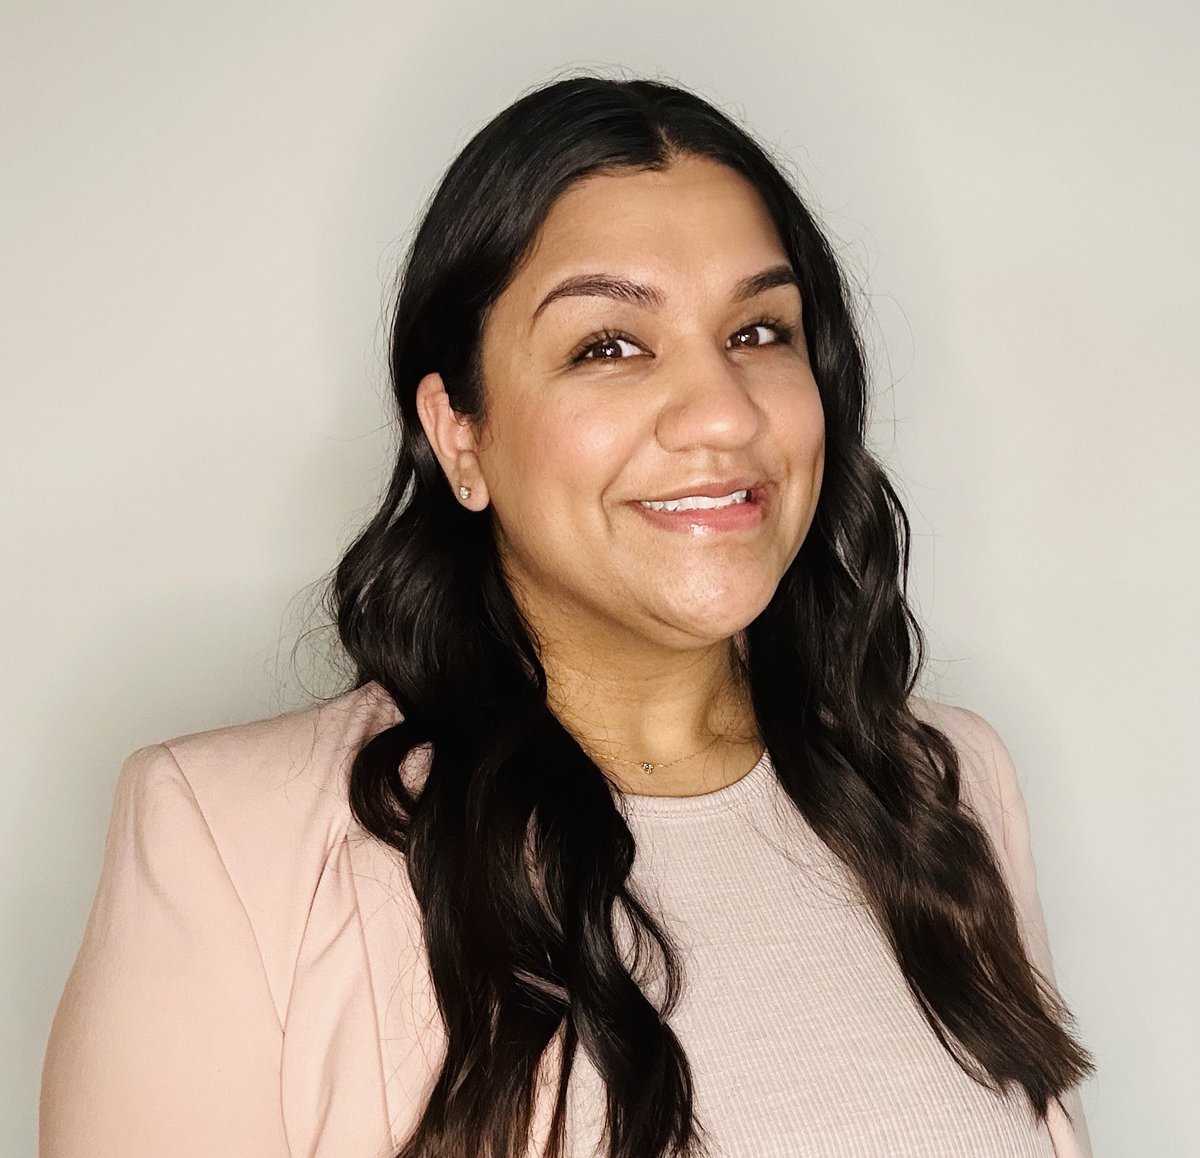 Raveena Ghag’s Bachelor's in communication gave her a foundation in writing and passion for creating social media content—and the Master’s in Legal Studies degree she’ll earn next year will put her one step closer to law school and a career as an attorney. bit.ly/3MrcFdf